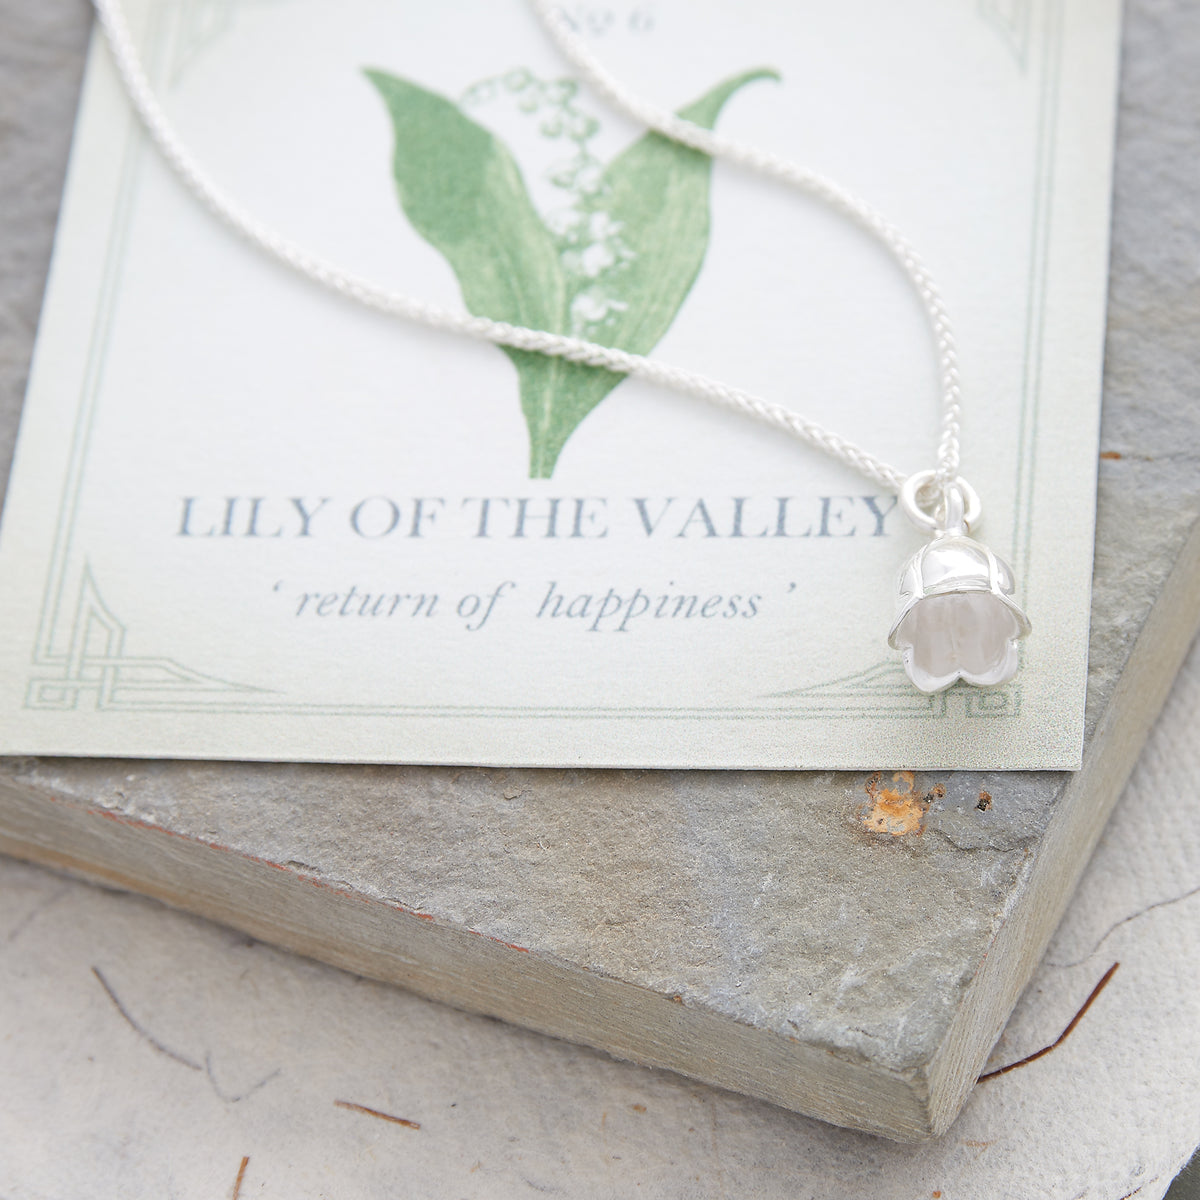 Lily Of The Valley Flower Silver Charm For Bracelet or Necklace from Scarlett Jewellery